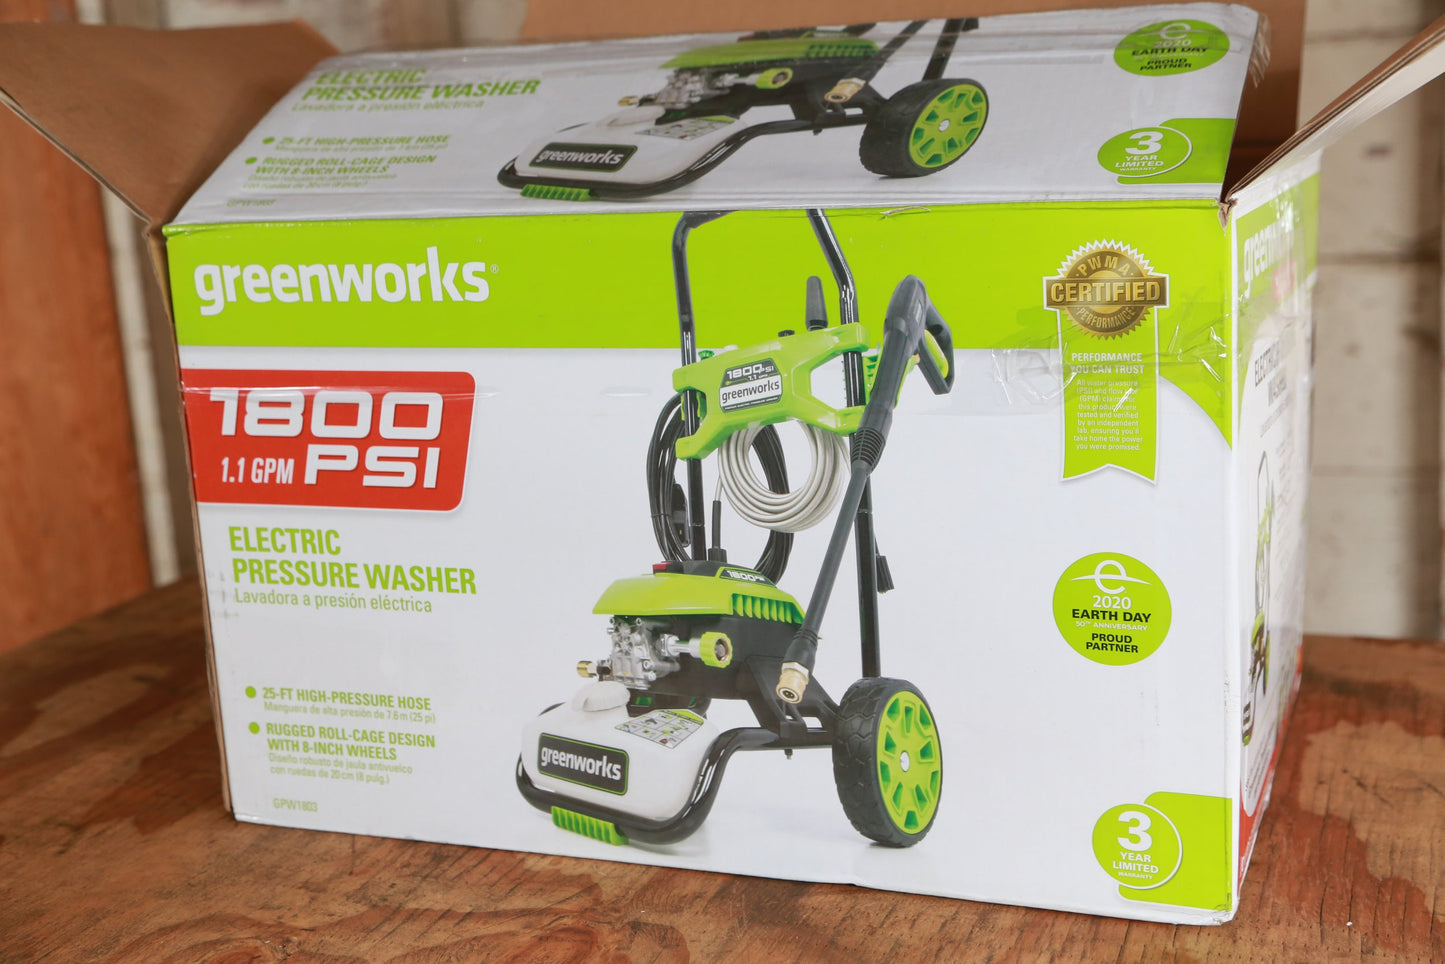 Greenworks 1800 PSI 1.1-Gallon Cold Water Electric Pressure Washer